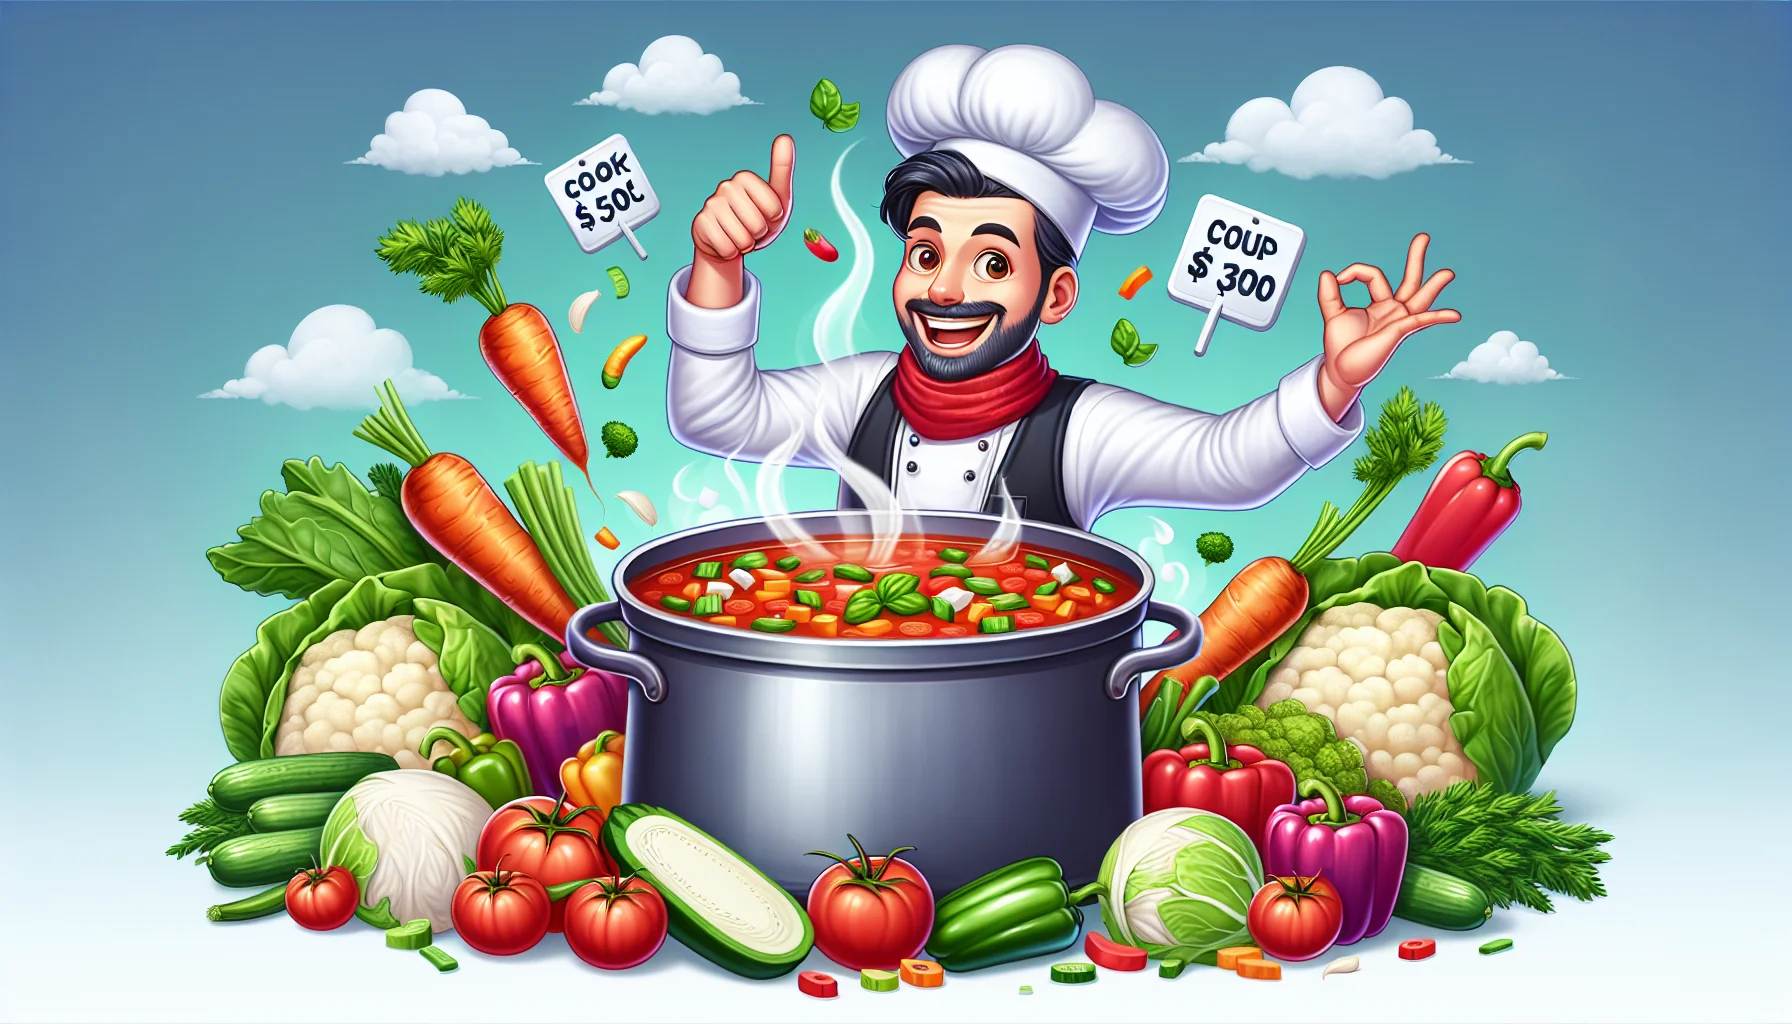 Create a lively and humorous image where a lively South Asian male chef is playfully adding ingredients into a large pot of steaming tomato soup. There are piles of fresh vegetables such as carrots, bell peppers, and cabbages around him waiting to be added to the soup, showcasing a colorful feast. There are also price tags clearly visible next to each pile indicating how affordable they are. The chef's expression and gesture are inviting and encouraging people to try cooking in this fun and healthy way. He should wear a traditional chef's uniform for authenticity, showcasing cleanliness and professionalism.